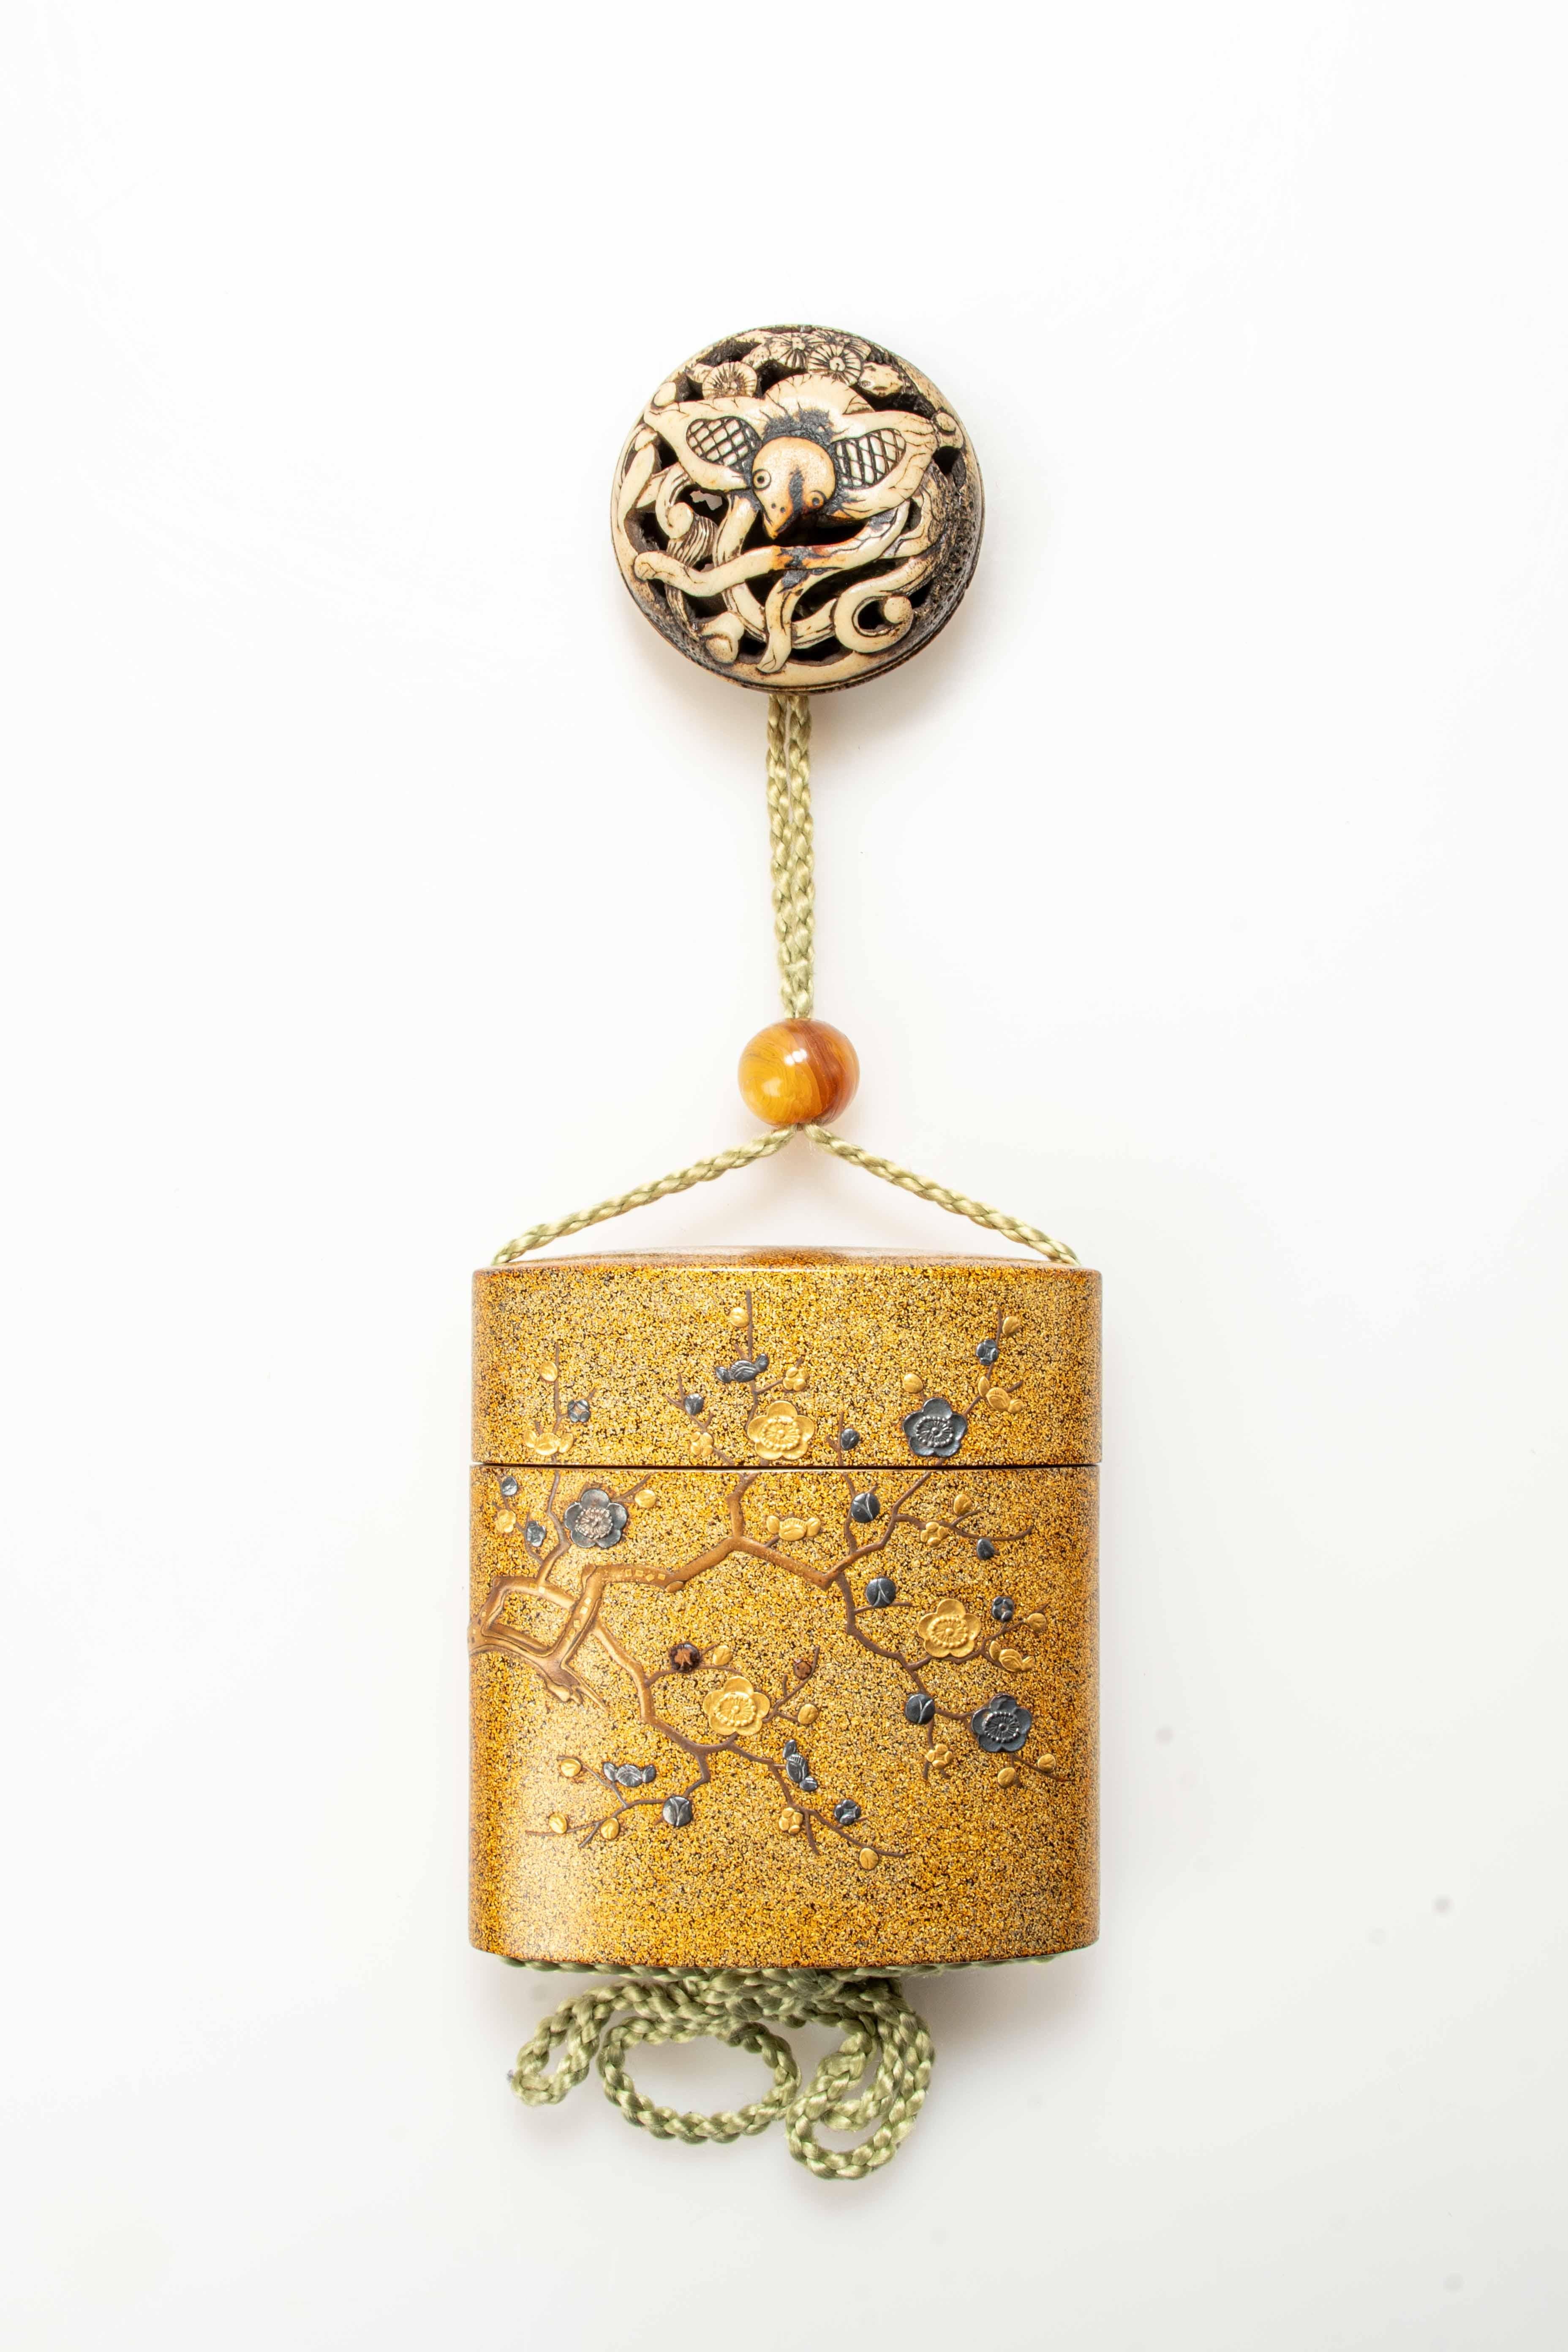 Inro in lacquer with applications of gilded and burnished metal flowers, depicting the blossoming of the cherry tree, on a nashiji background.

The decorative branches on the inro were created using the maki-è relief technique in lacquer. The ojime